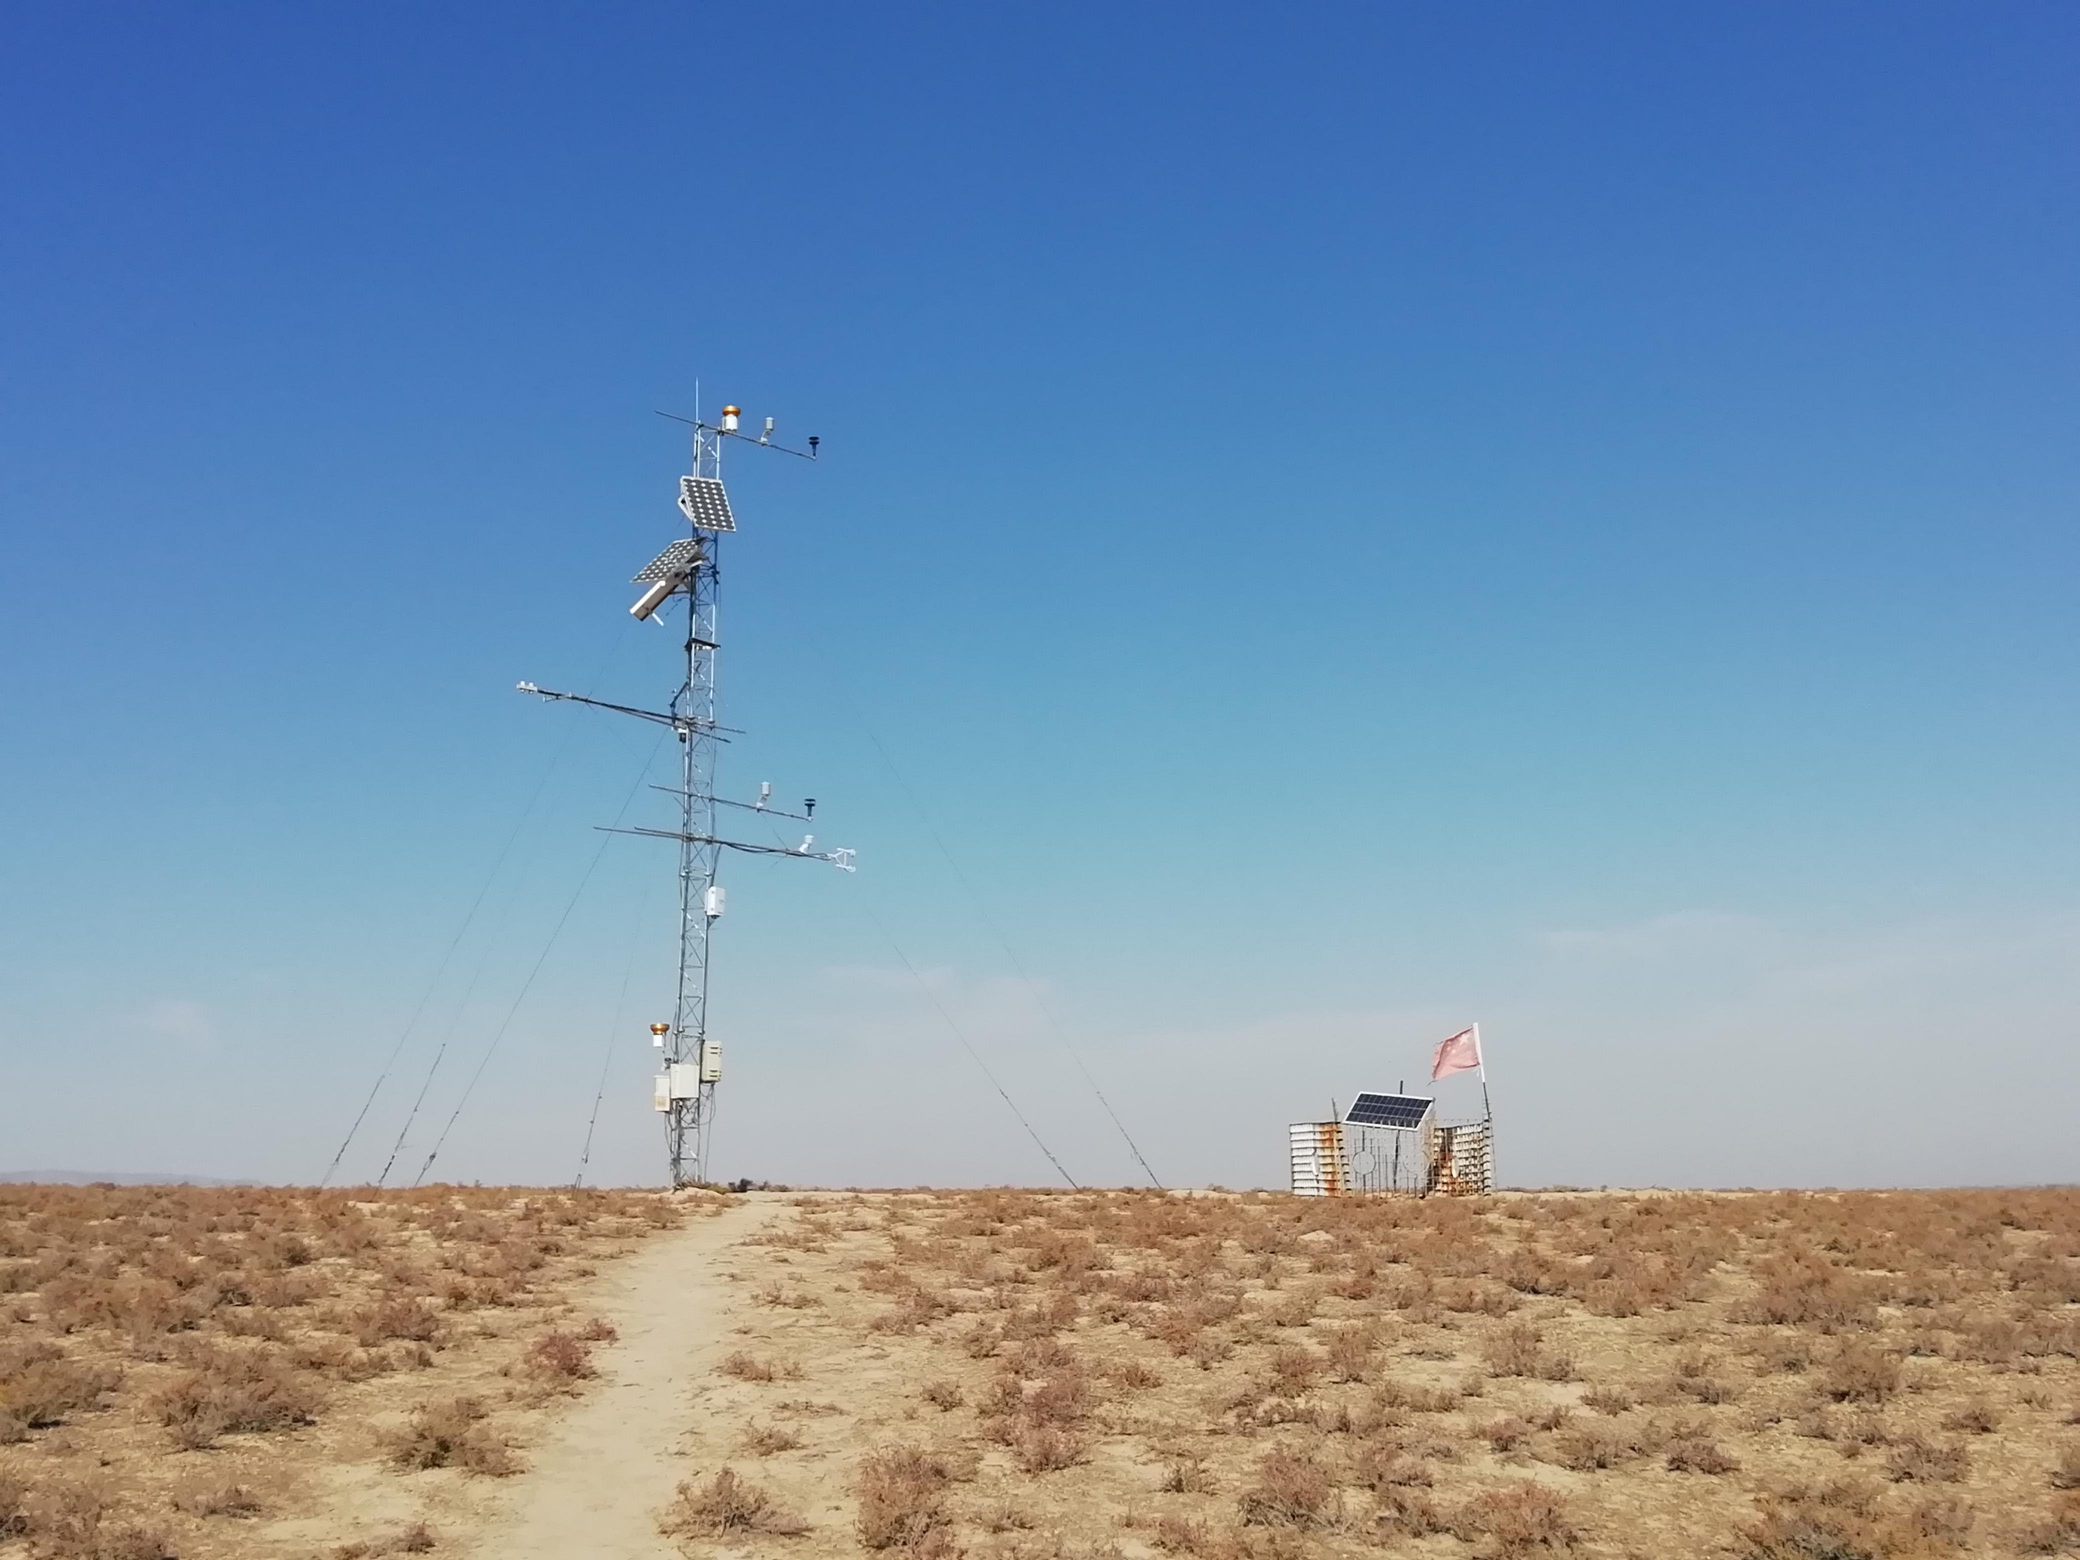 Qilian Mountains integrated observatory network: Dataset of Heihe integrated observatory network (eddy covariance system of Huazhaizi station, 2020)